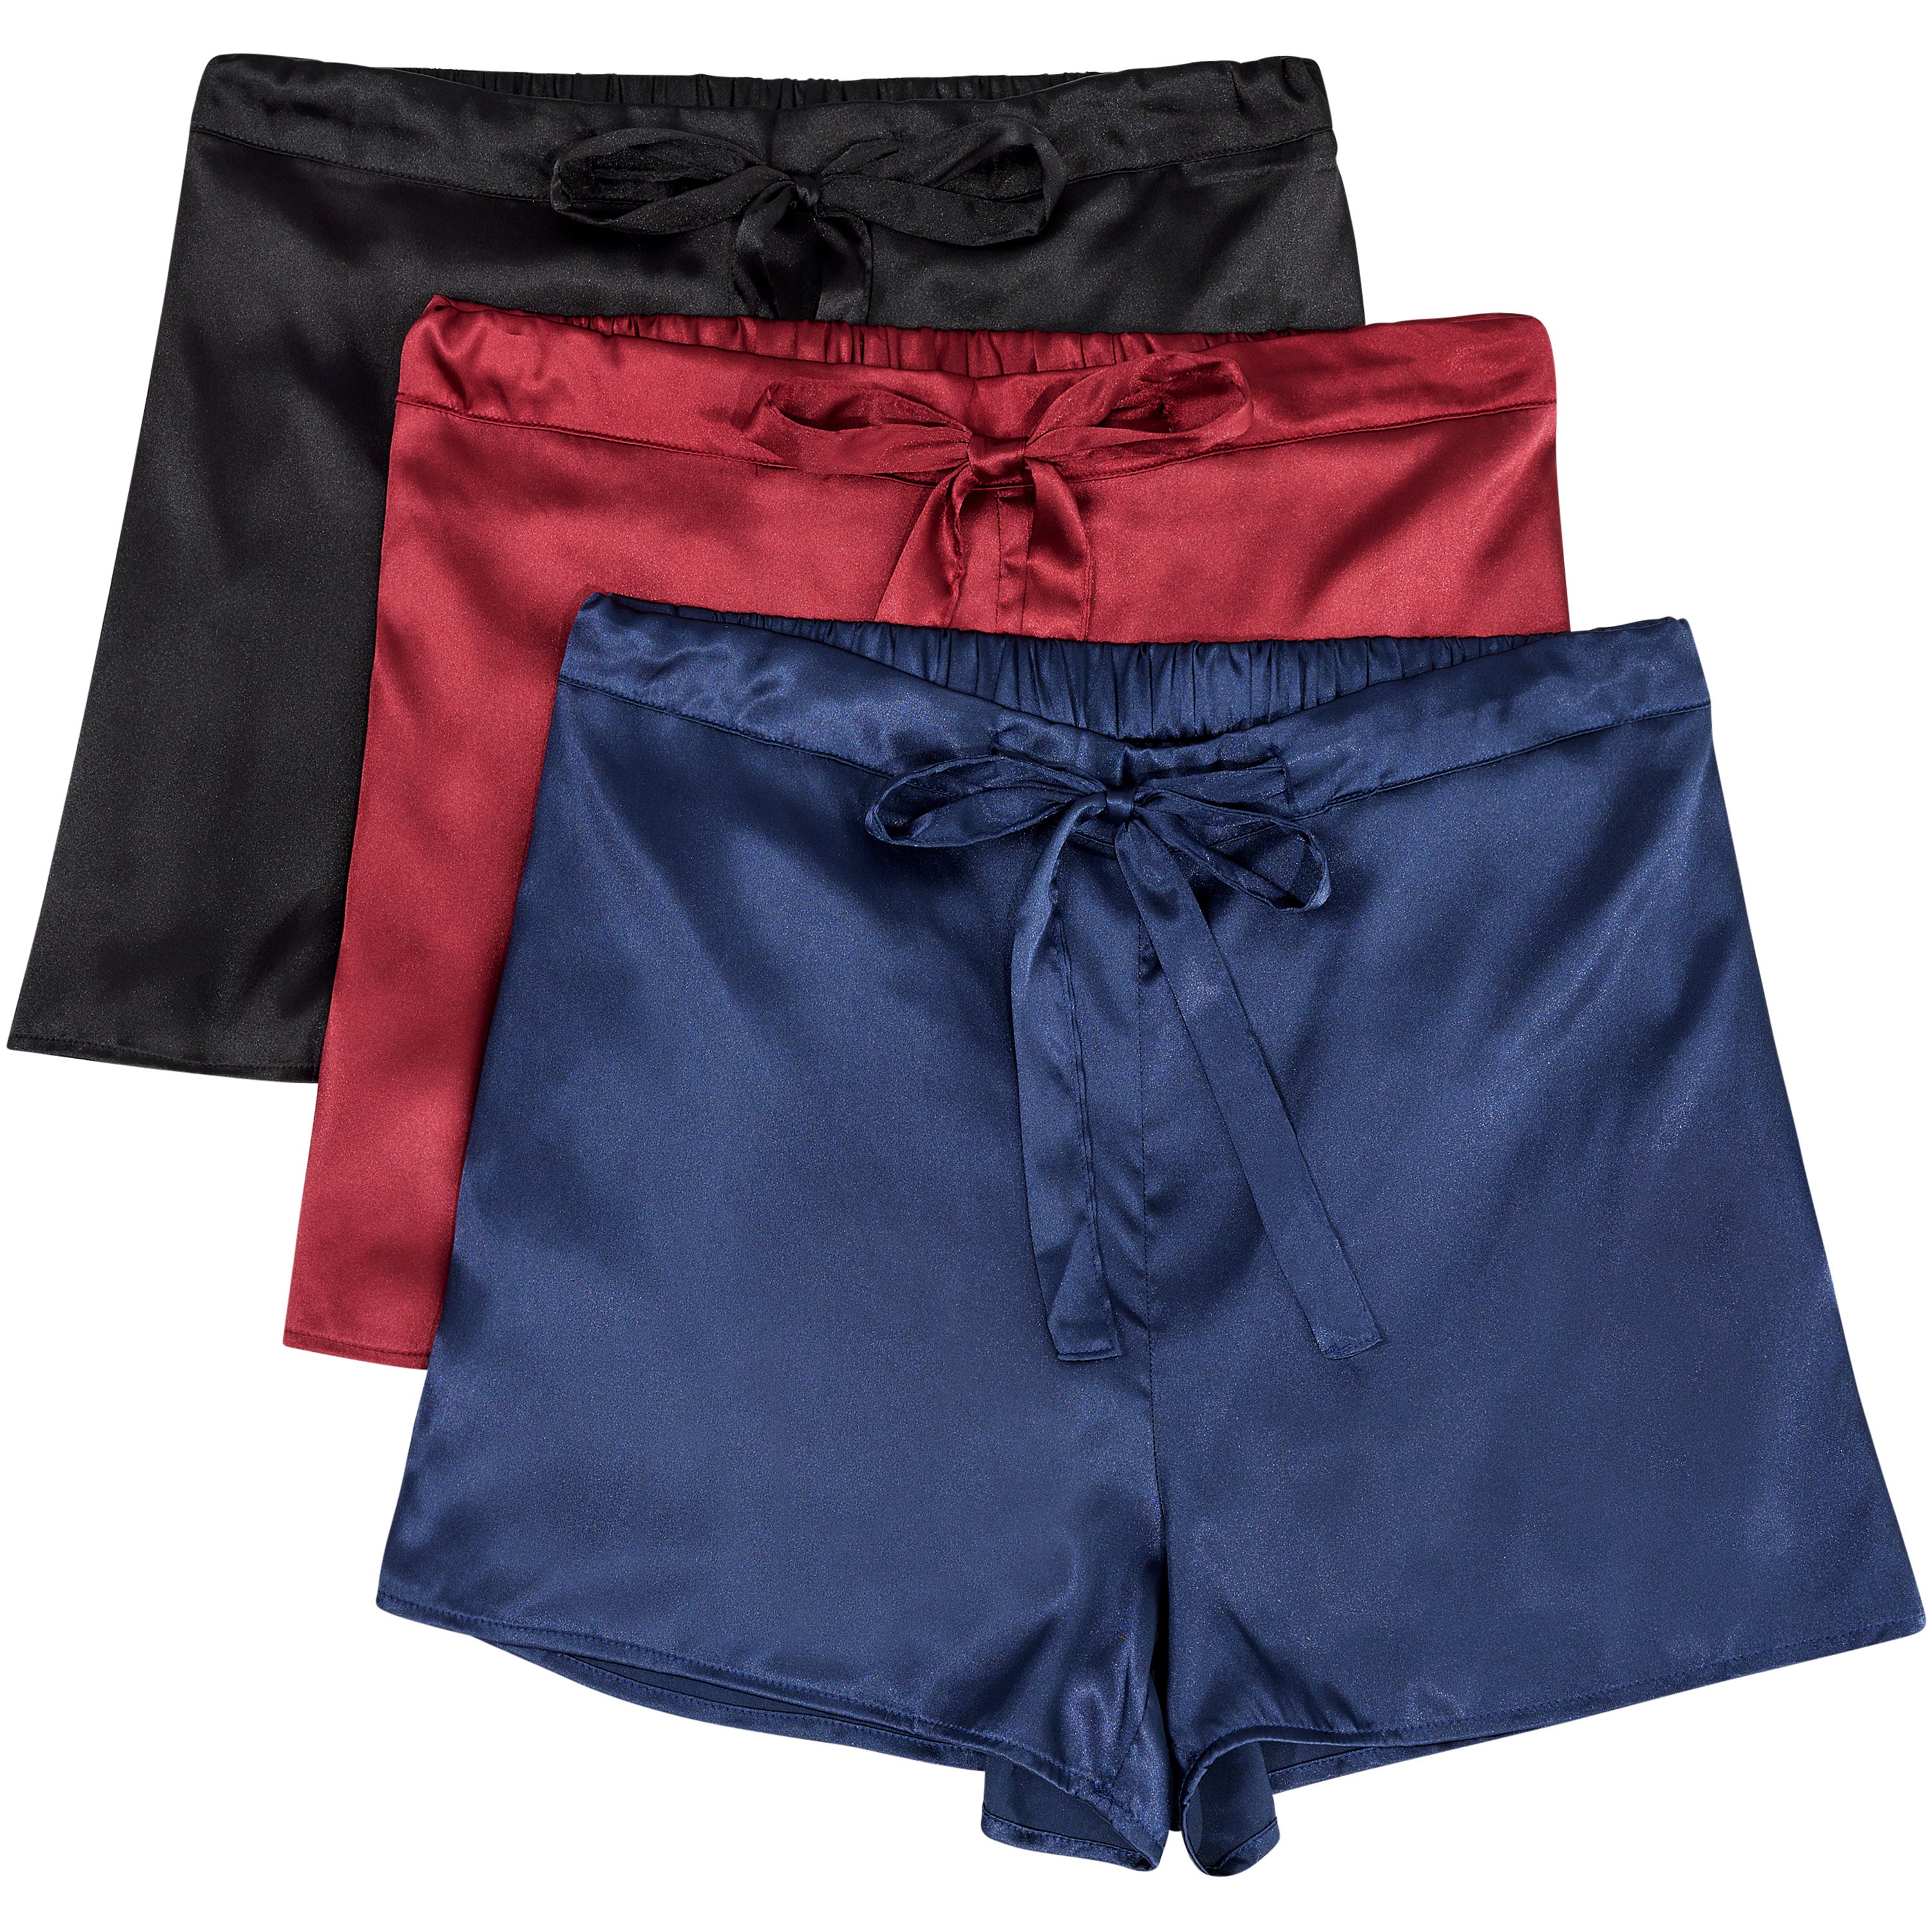 Lady Boxers with Pockets, Pack of 3 Women's Satin Boxers with Drawstring,  Sleep Shorts